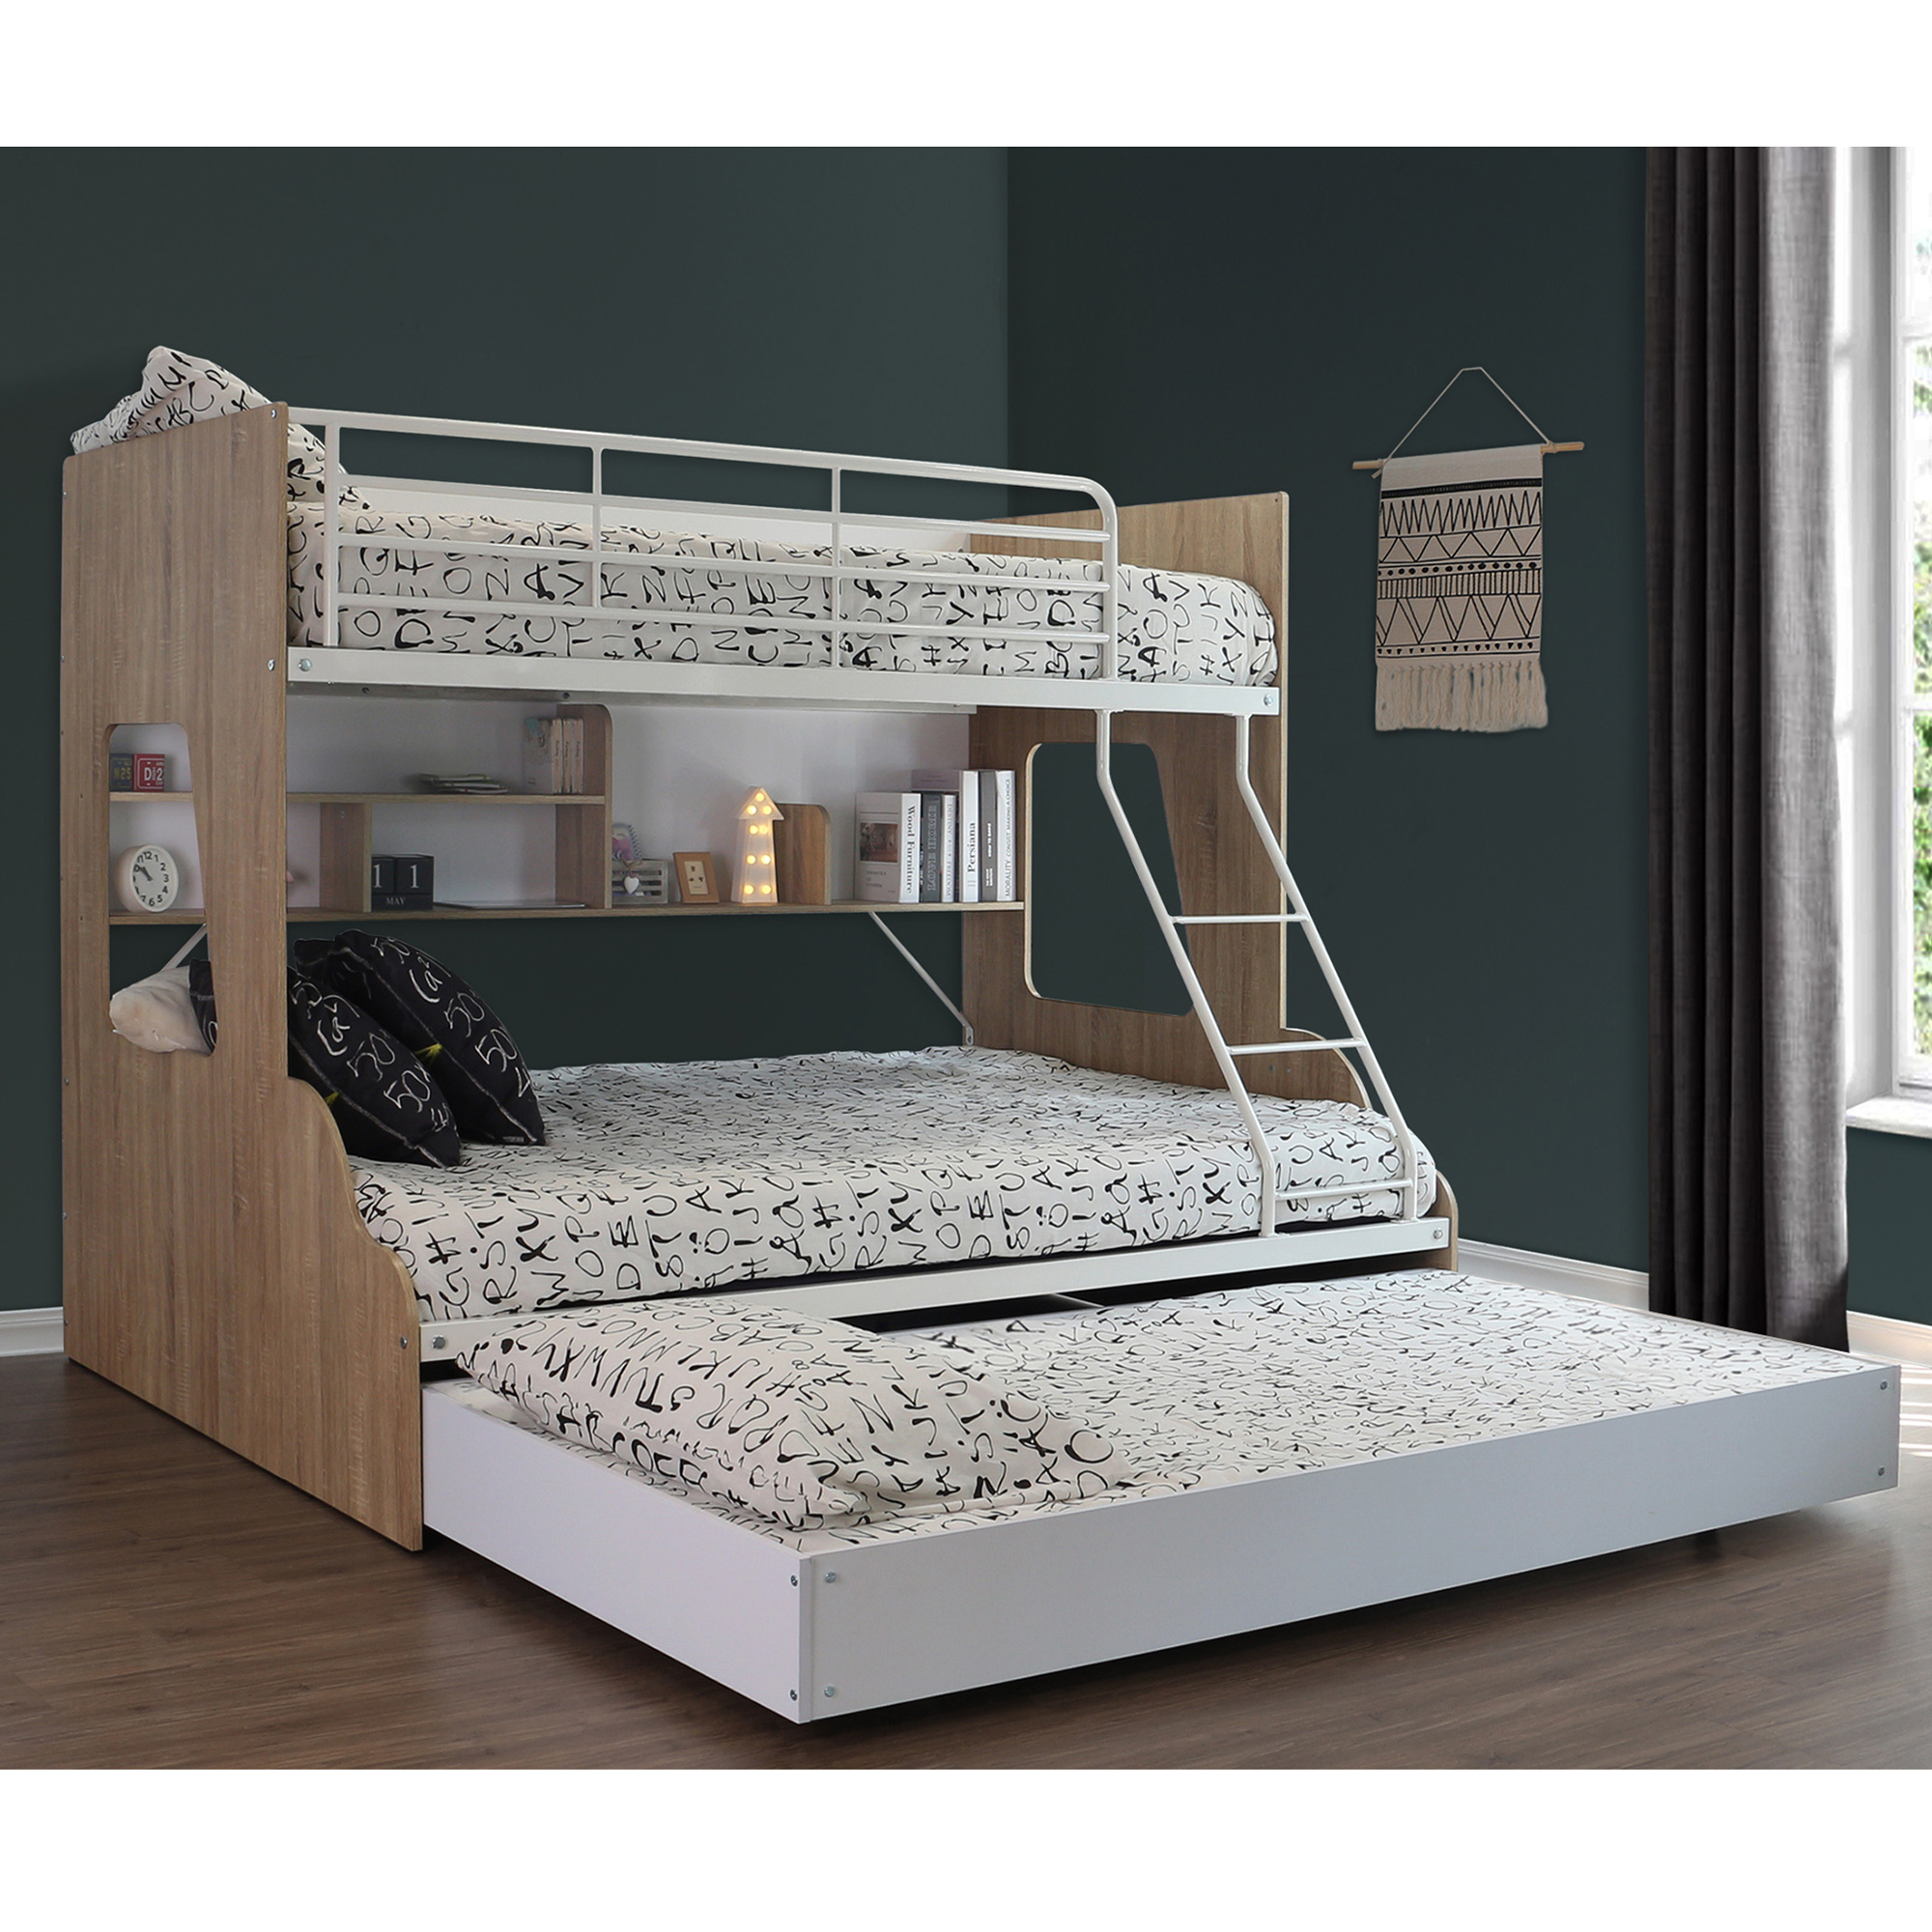 Single Over Double Trio Bunk Bed, Trundle Bunk Beds With Mattresses